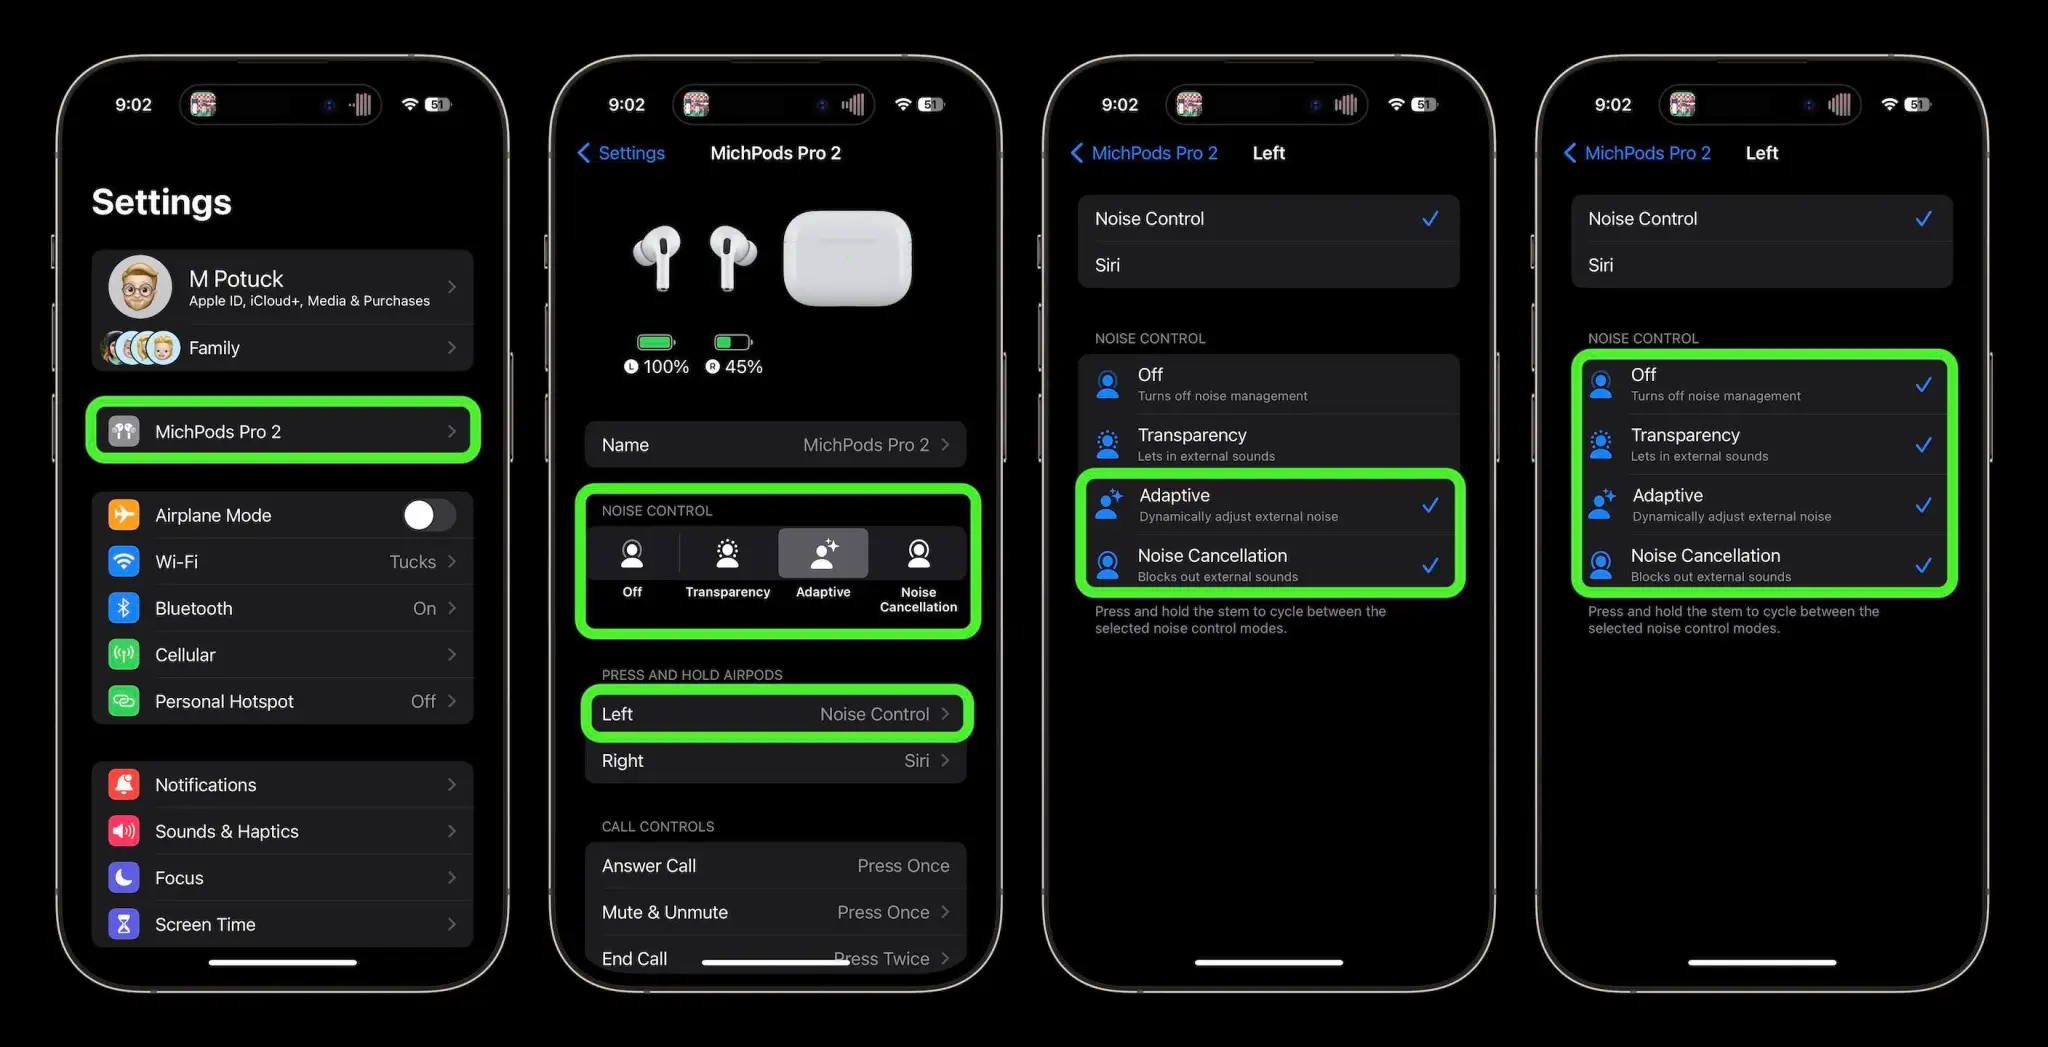 ❤ Five new features coming to AirPods Pro 2 this year